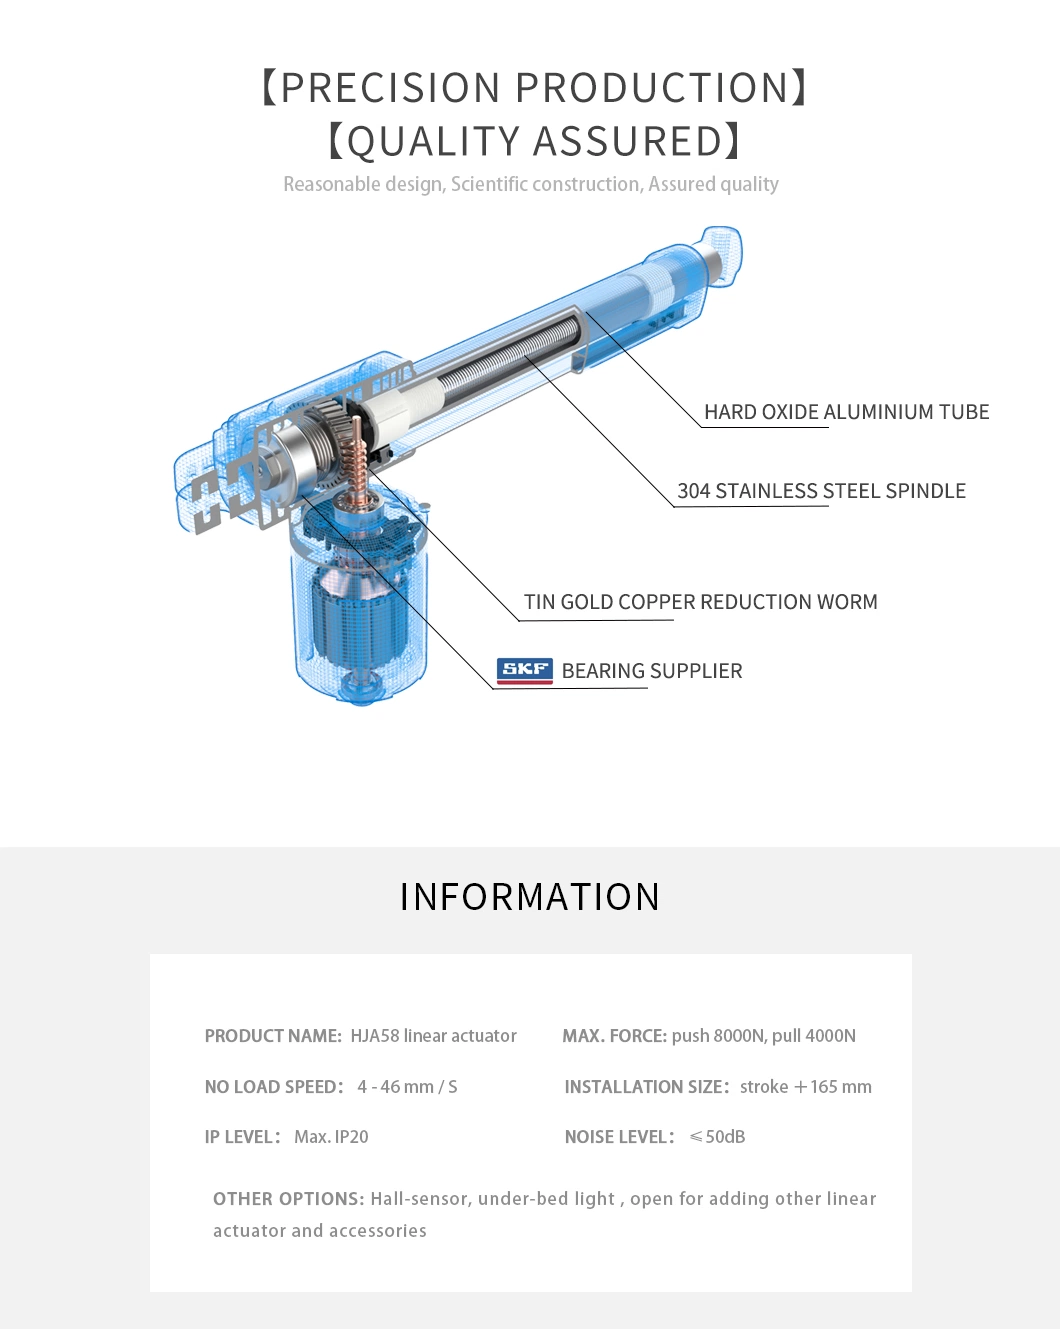 Richmat 8000n China Supplier of Linear Actuator with Customized Service